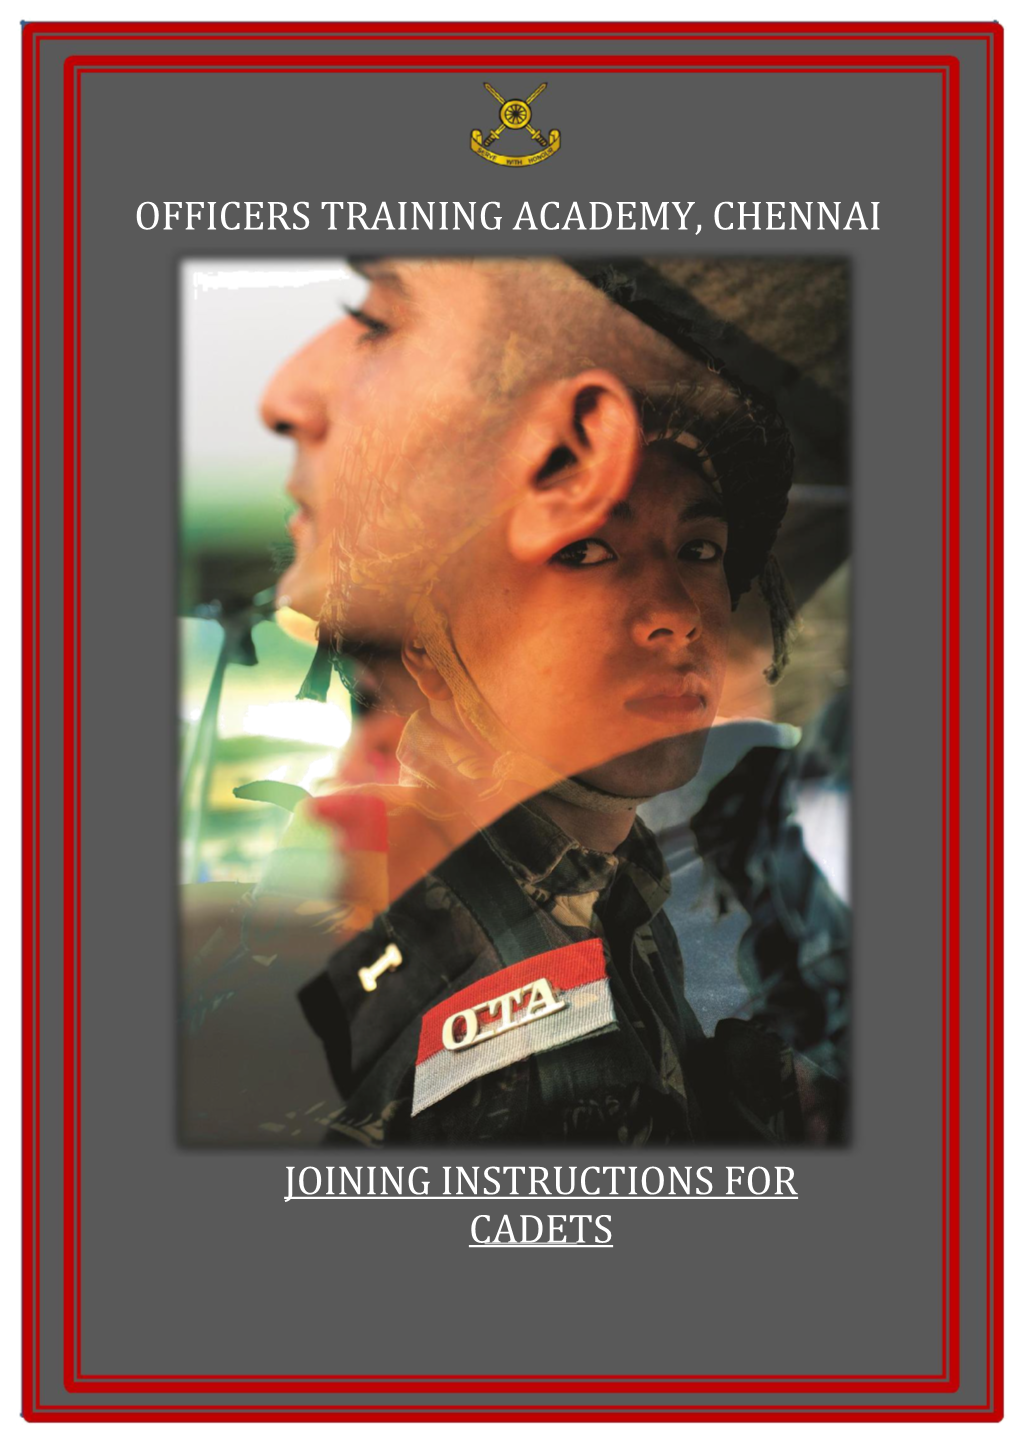 Officers Training Academy, Chennai Joining